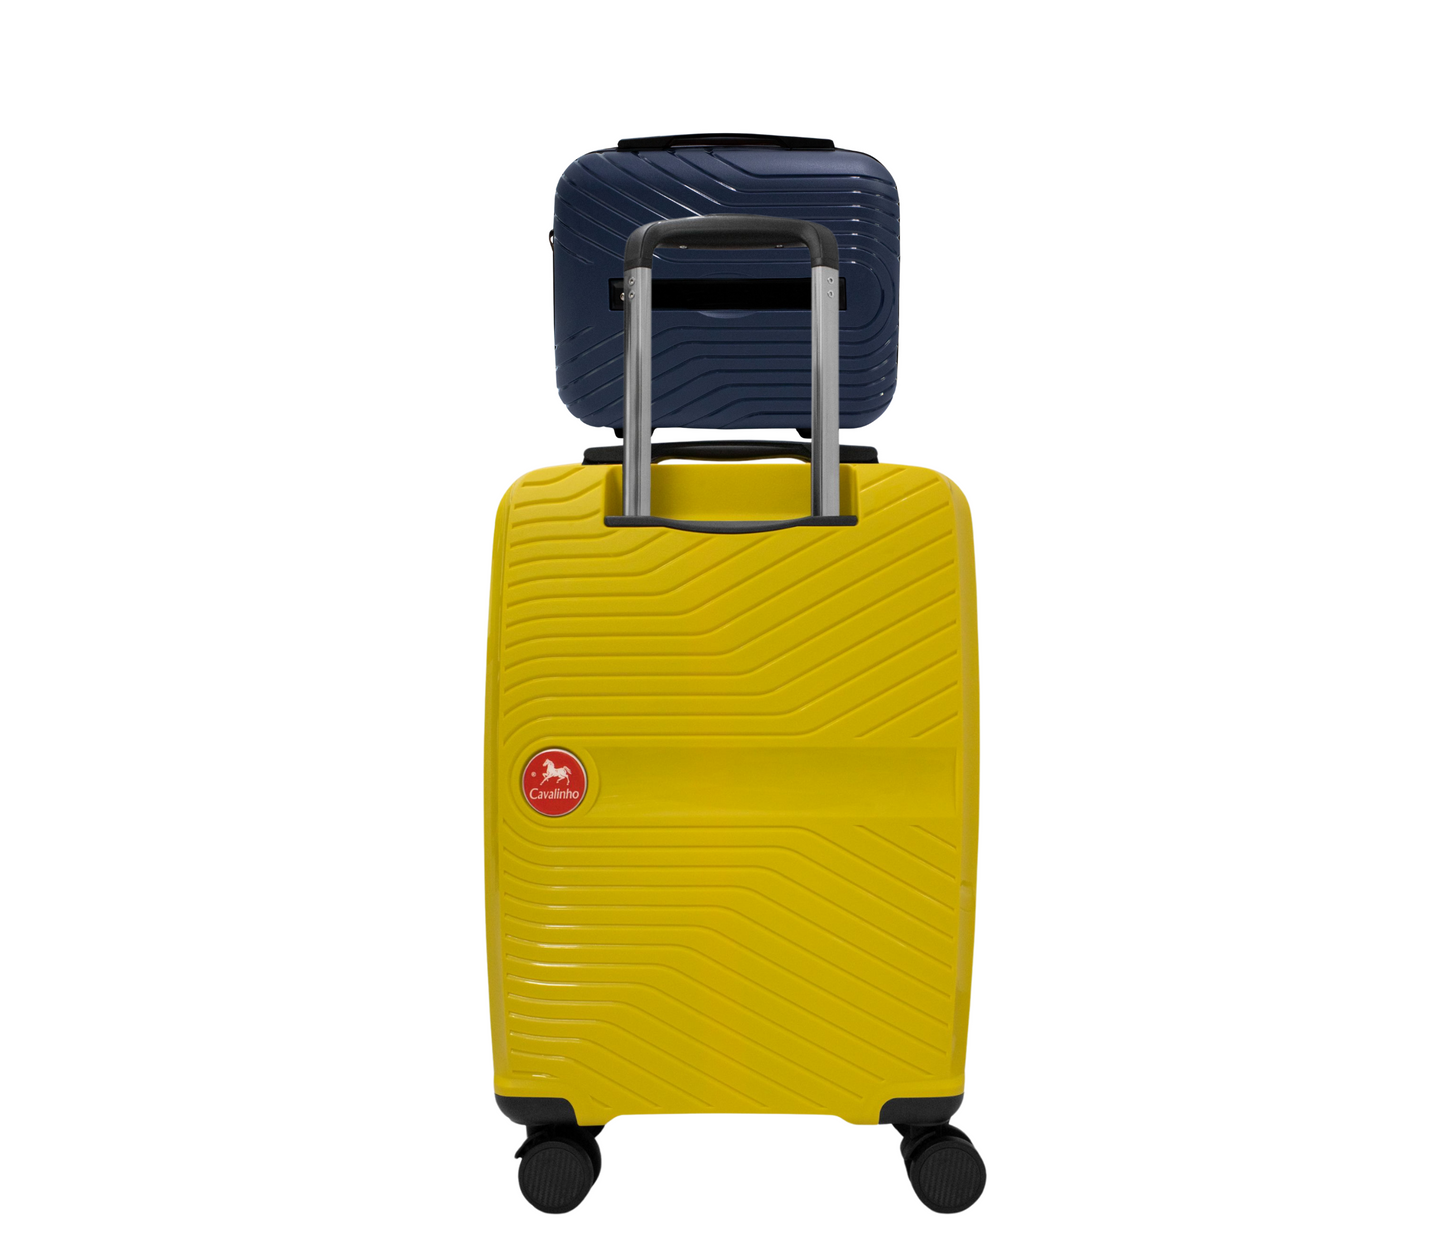 #color_ Navy Yellow | Cavalinho Canada & USA Colorful 2 Piece Luggage Set (15" & 19") - Navy Yellow - 68020004.0308.S1519._2